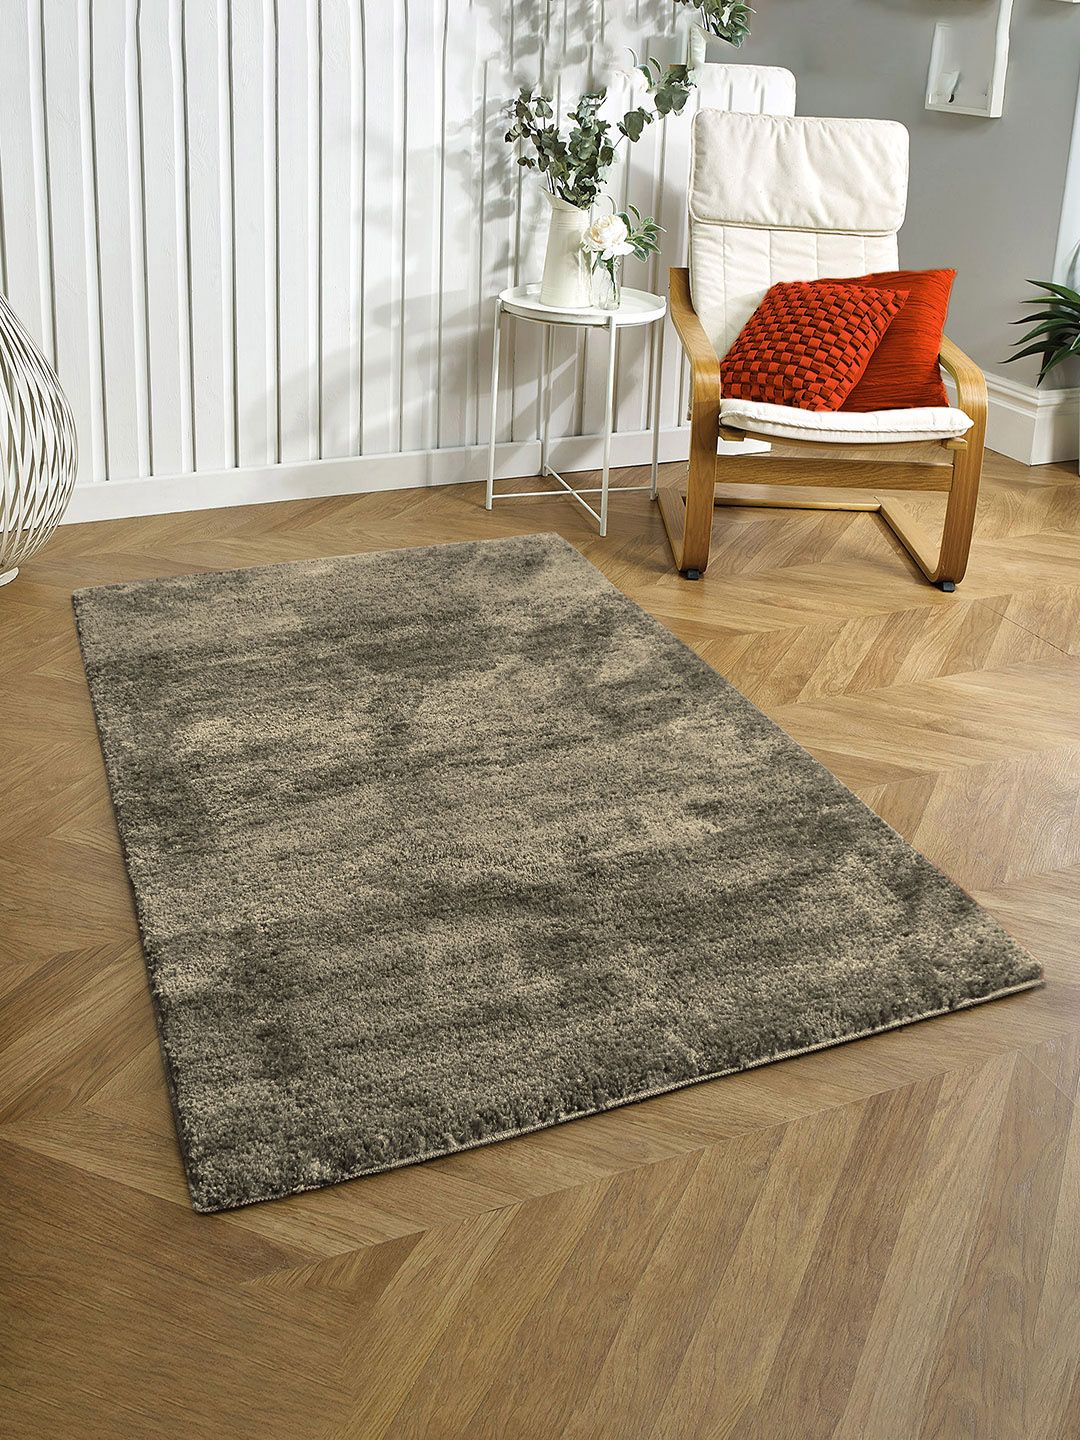 LUXEHOME INTERNATIONAL Taupe Brown Solid Rectangular Anti-Skid Carpet Price in India